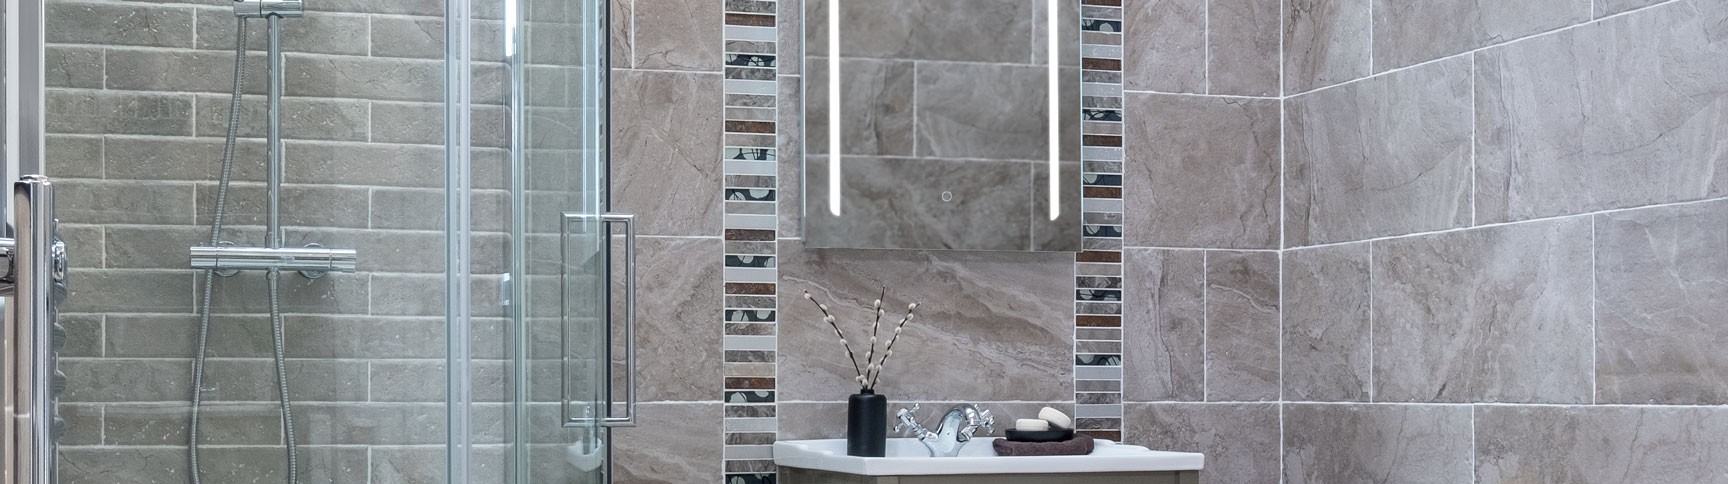 Bluetooth Mirrors & Cabinets | Bathroom Mirrors | World of Tiles